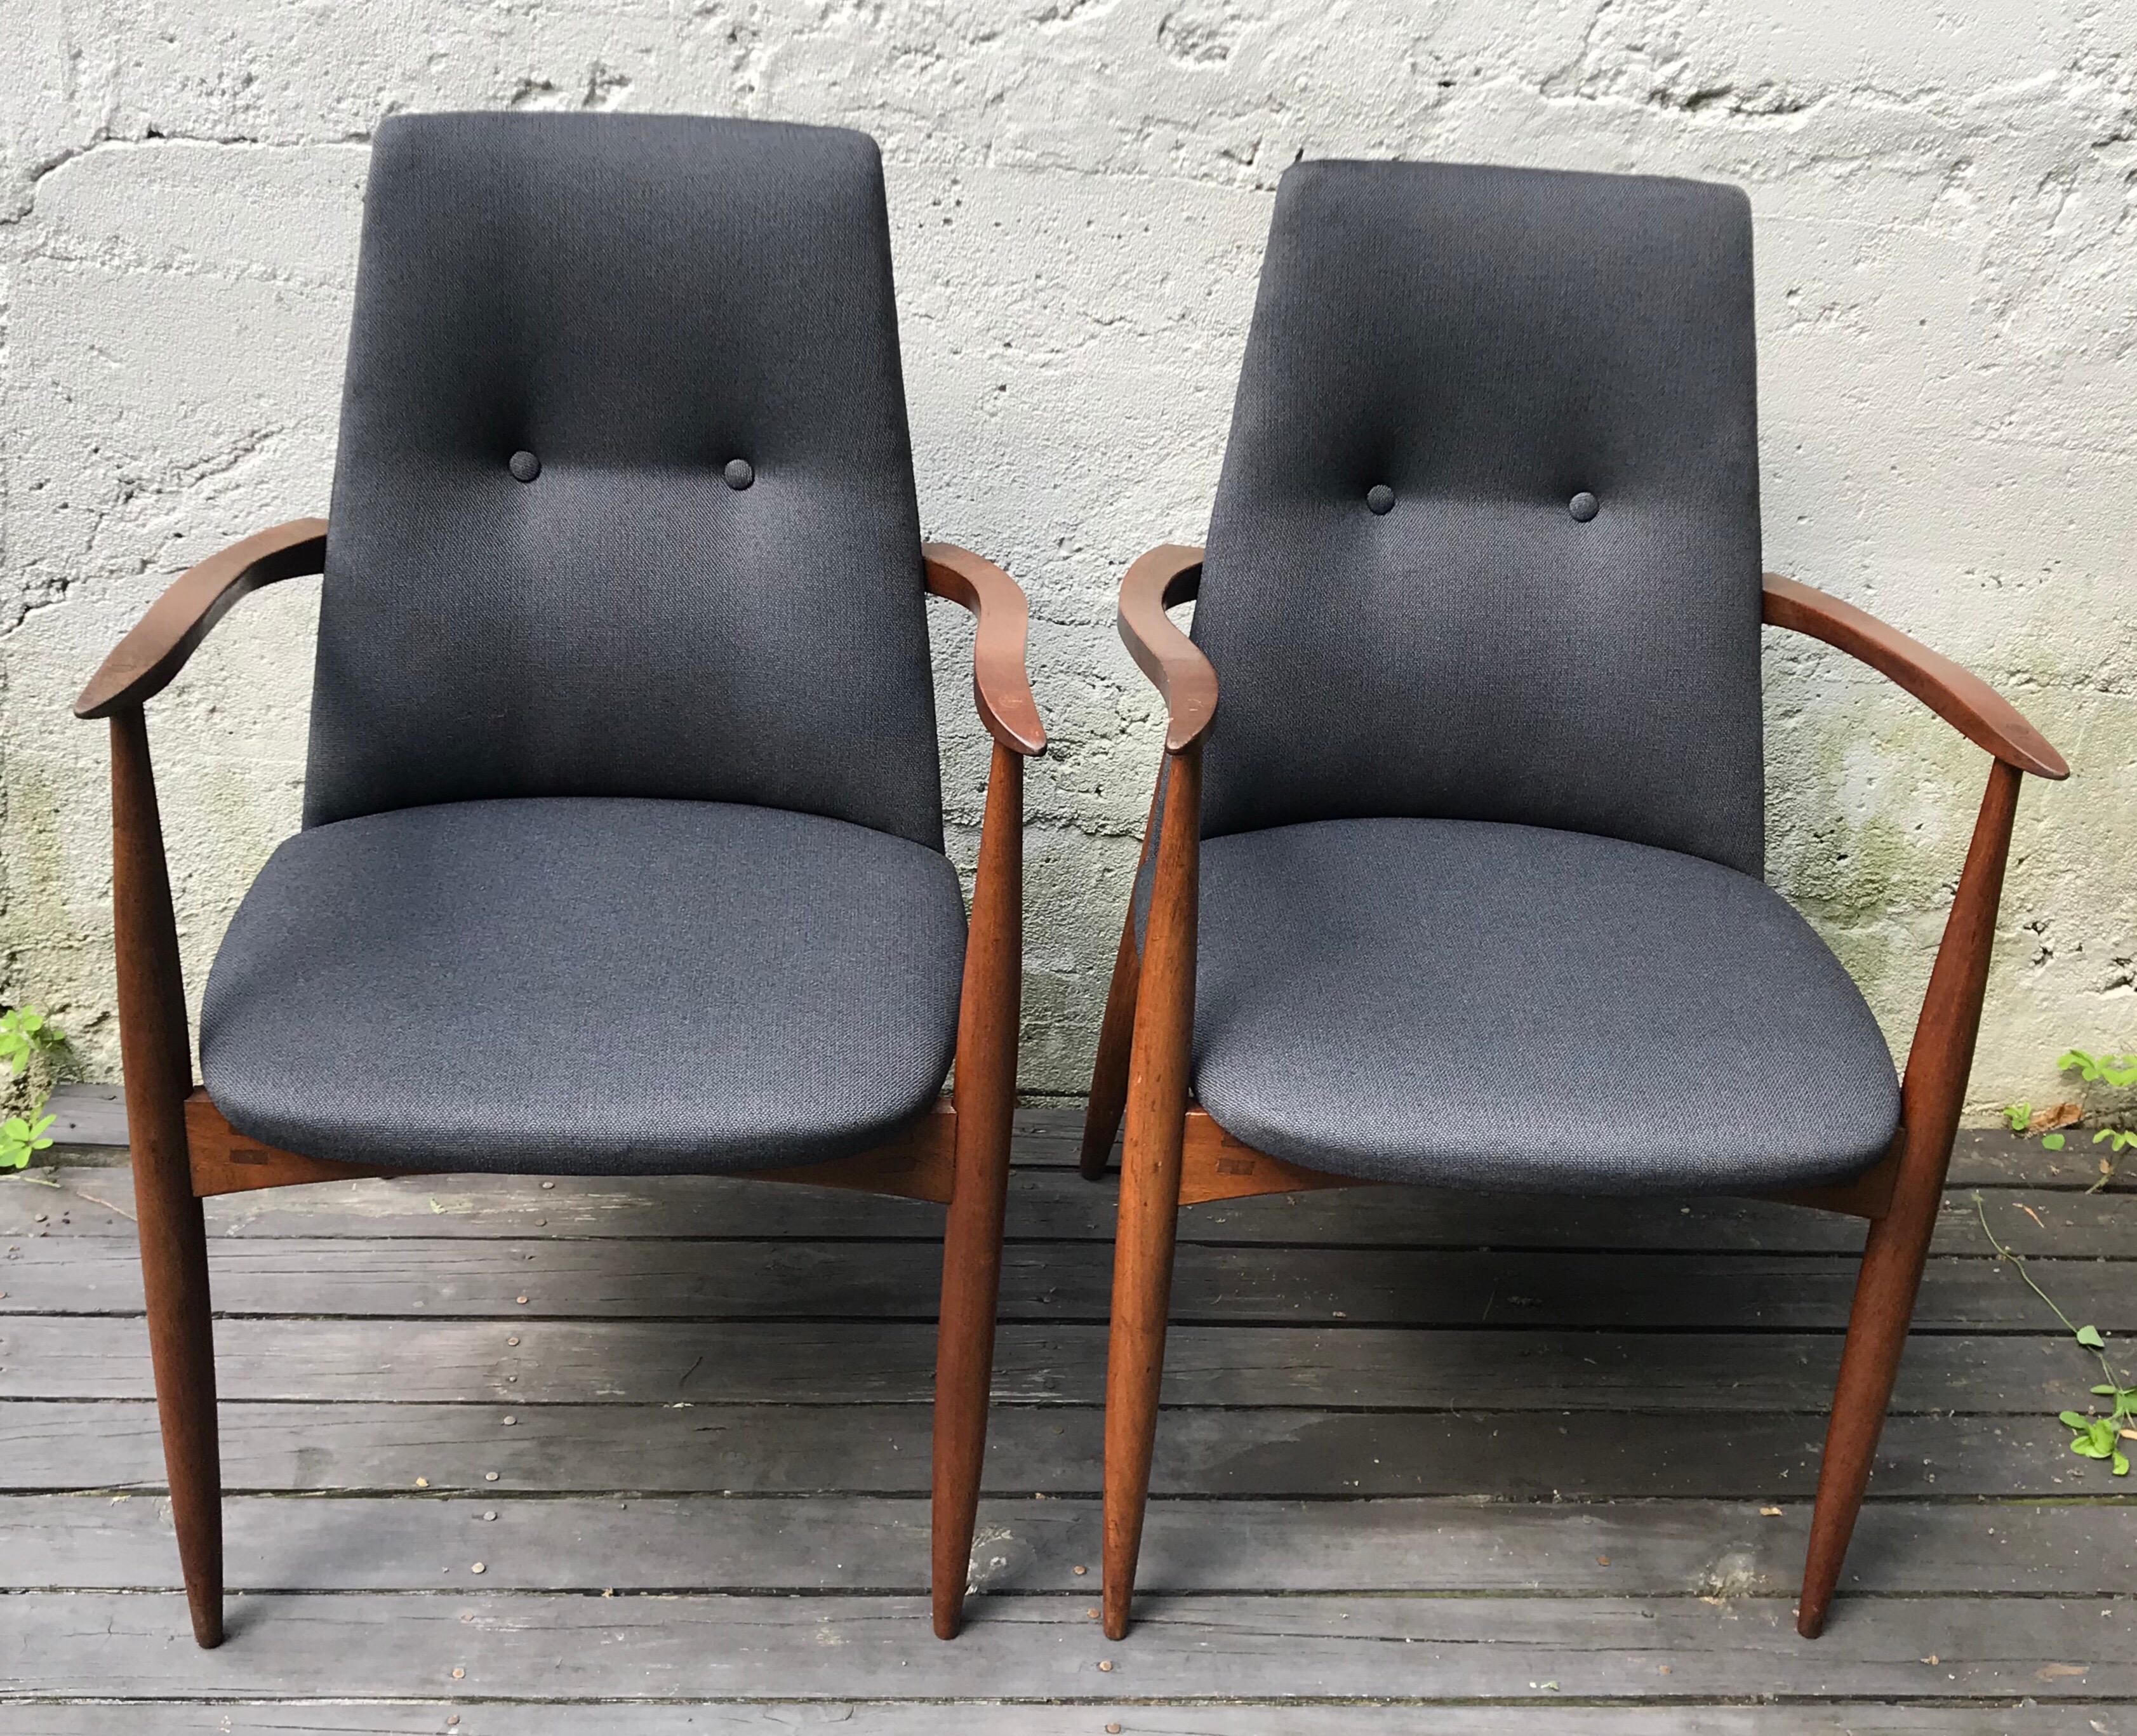 Amazing pair of side/lounge chairs with curved armrests, reupholstered in Knoll solid grey fabric. Designed by Peter Hayward for Vanson, England, 1960s.